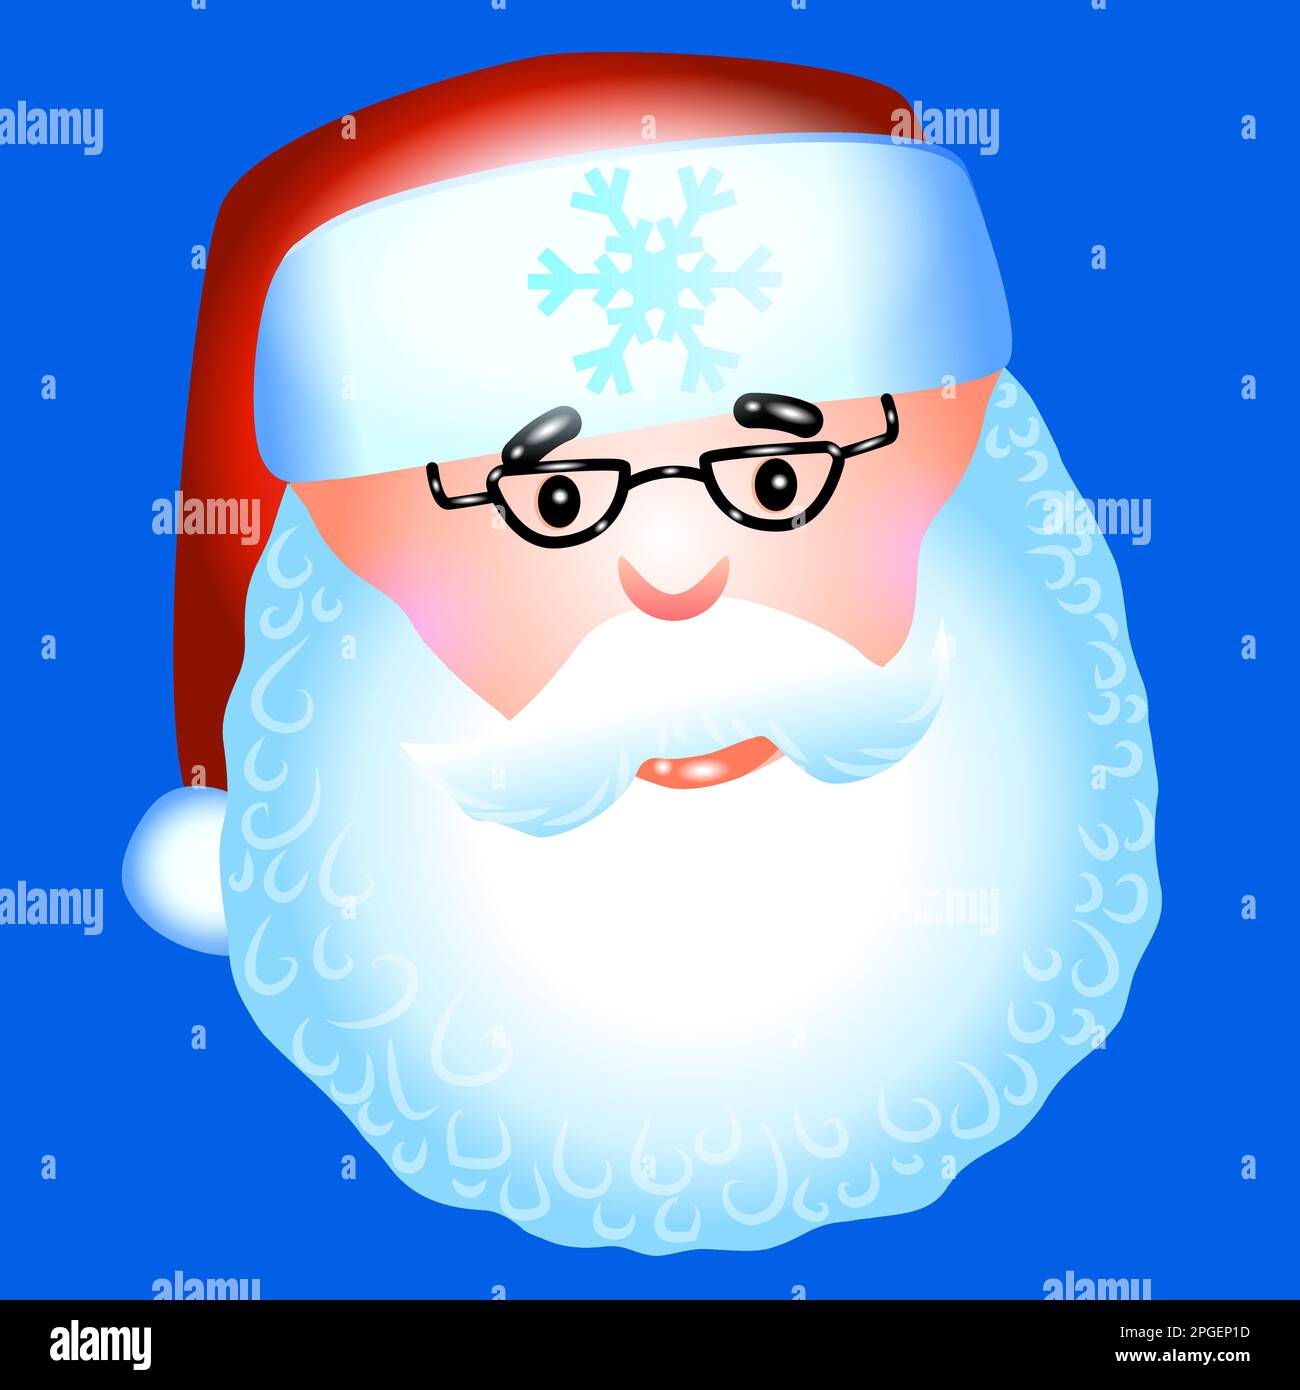 Cute Santa Claus head in a New Year's hat smiles on a blue background.  Stock Vector